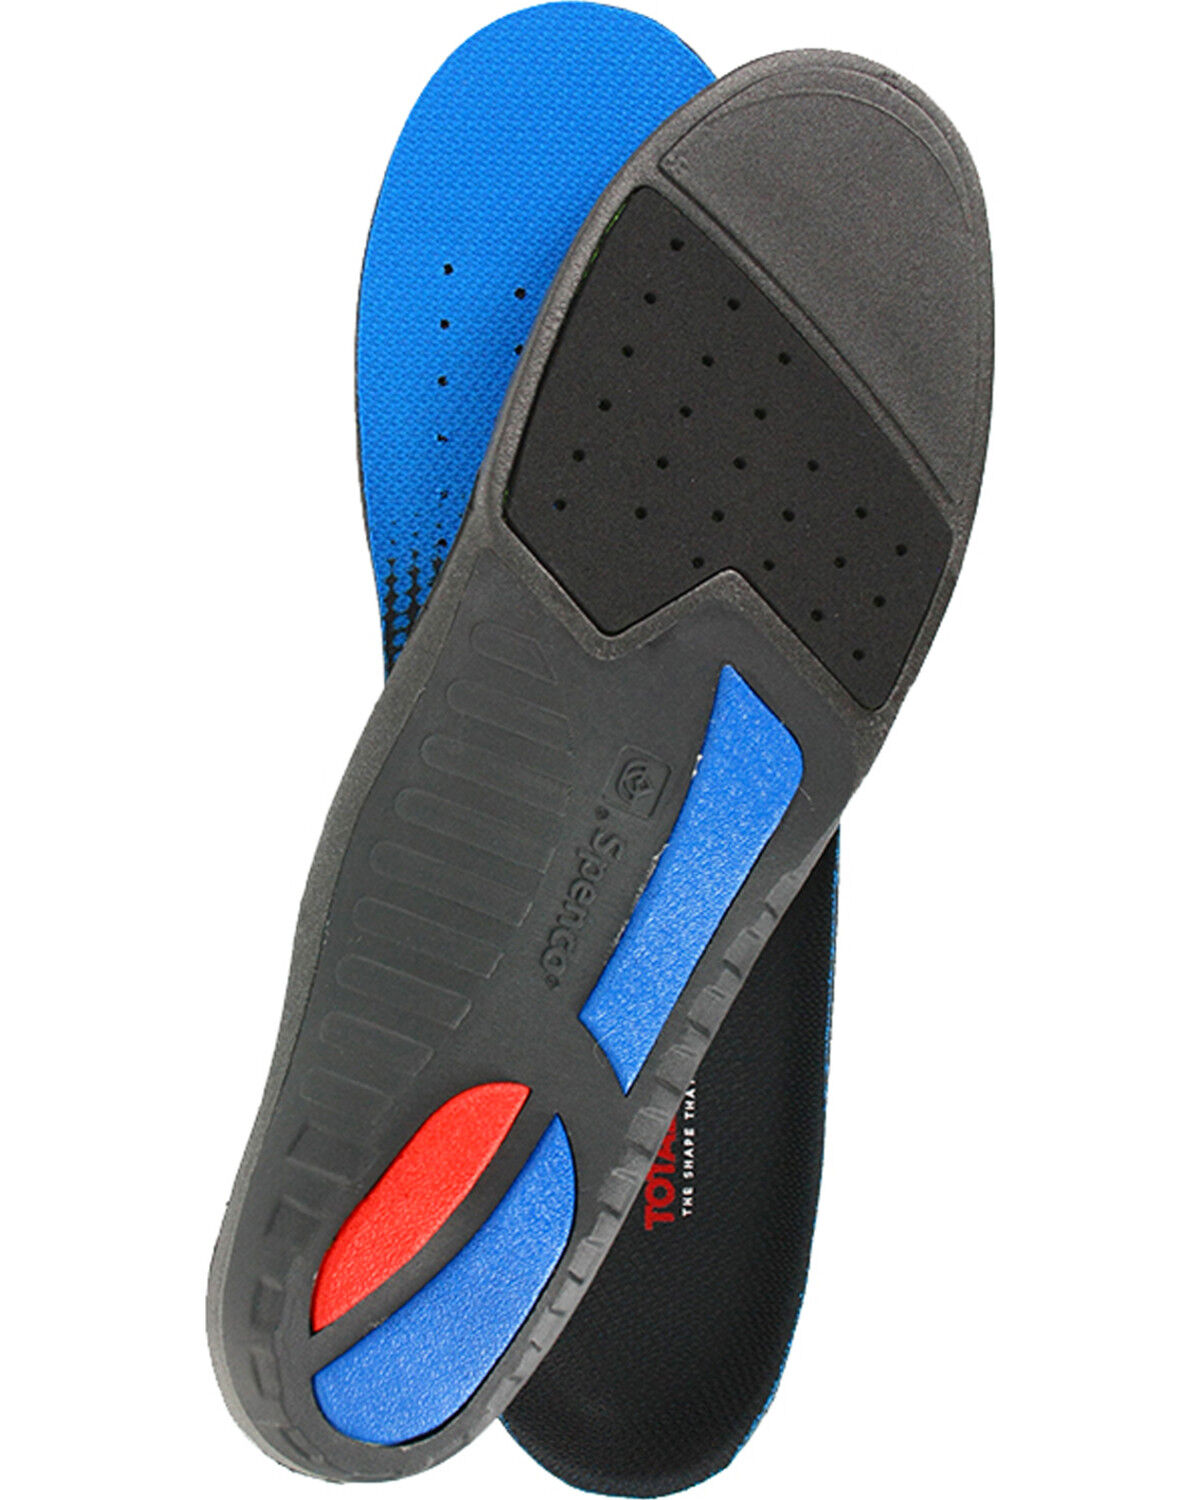 total support insoles